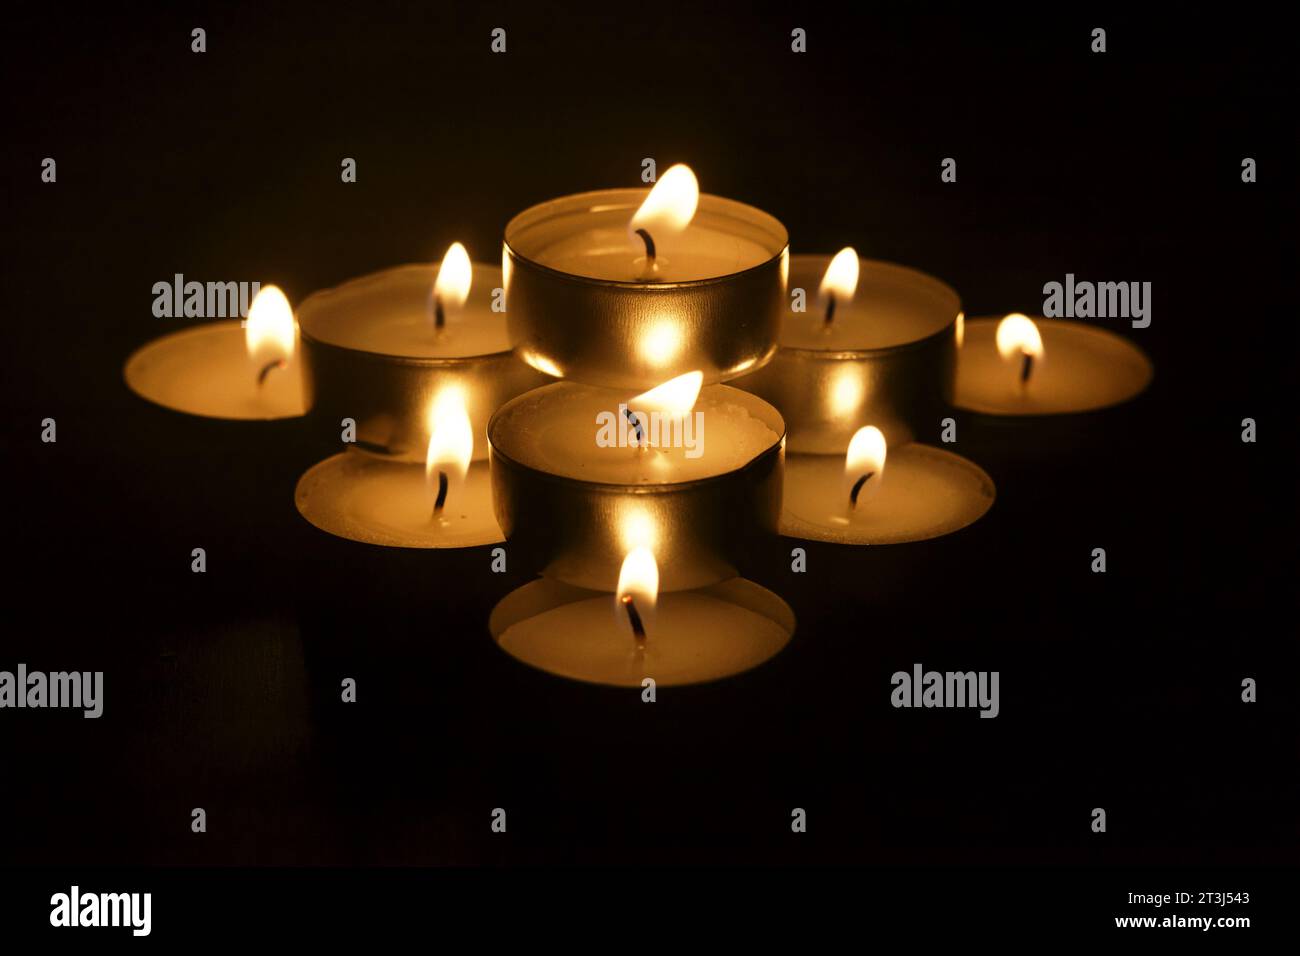 https://c8.alamy.com/comp/2T3J543/rows-of-candles-in-the-dark-seen-up-close-2T3J543.jpg